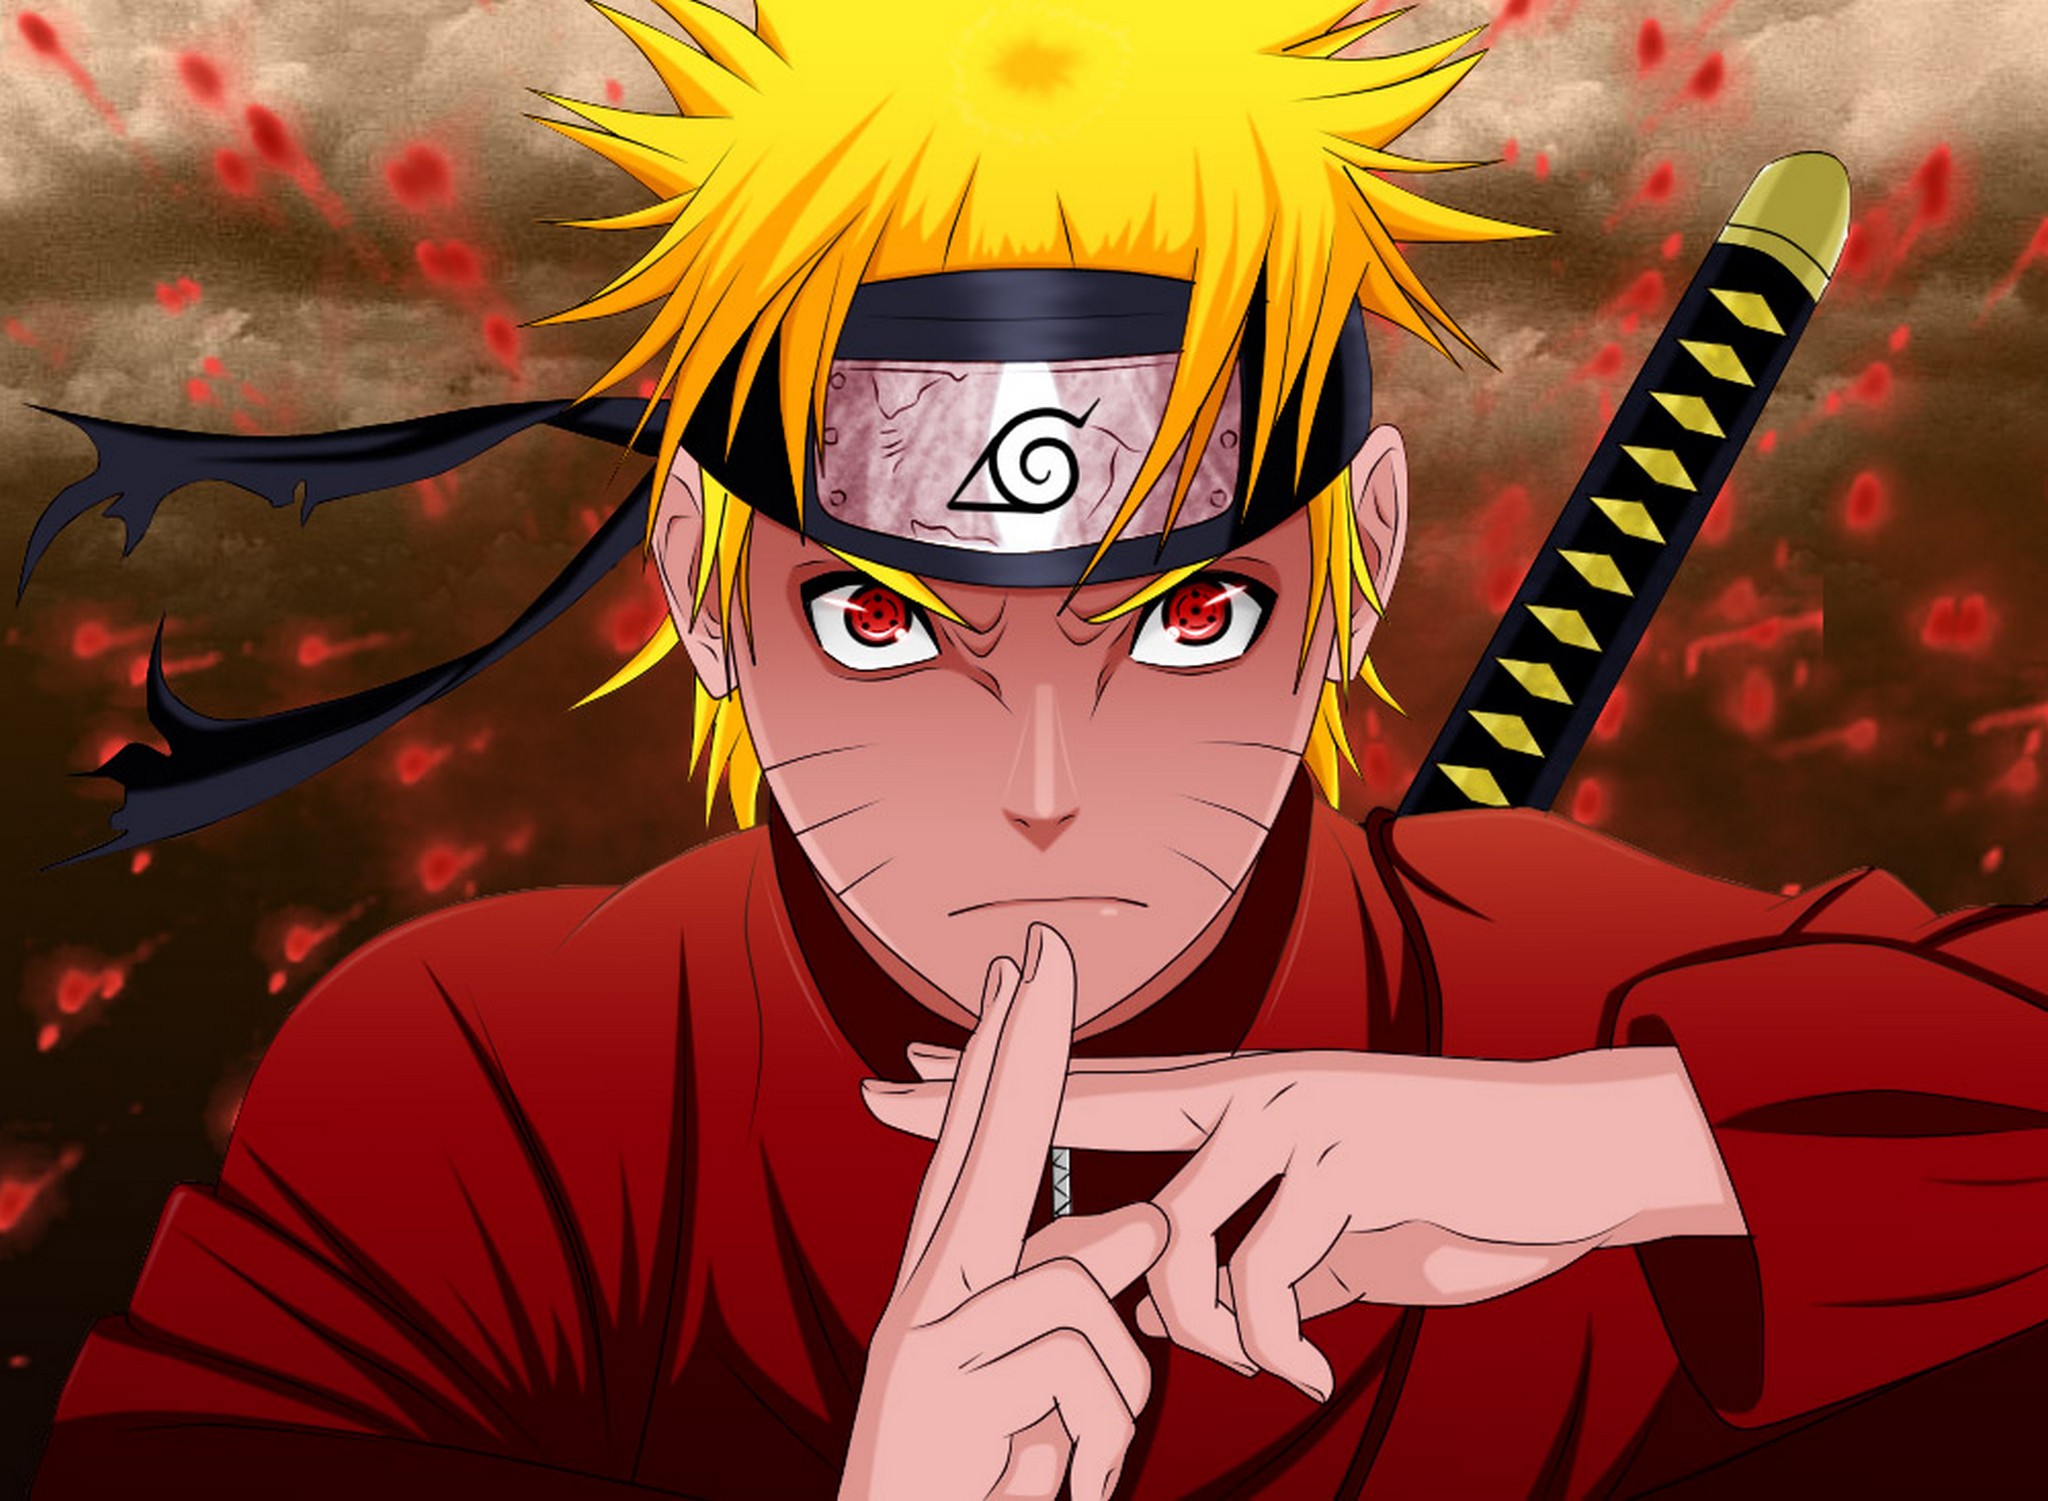 chris havemann add images of naruto photo